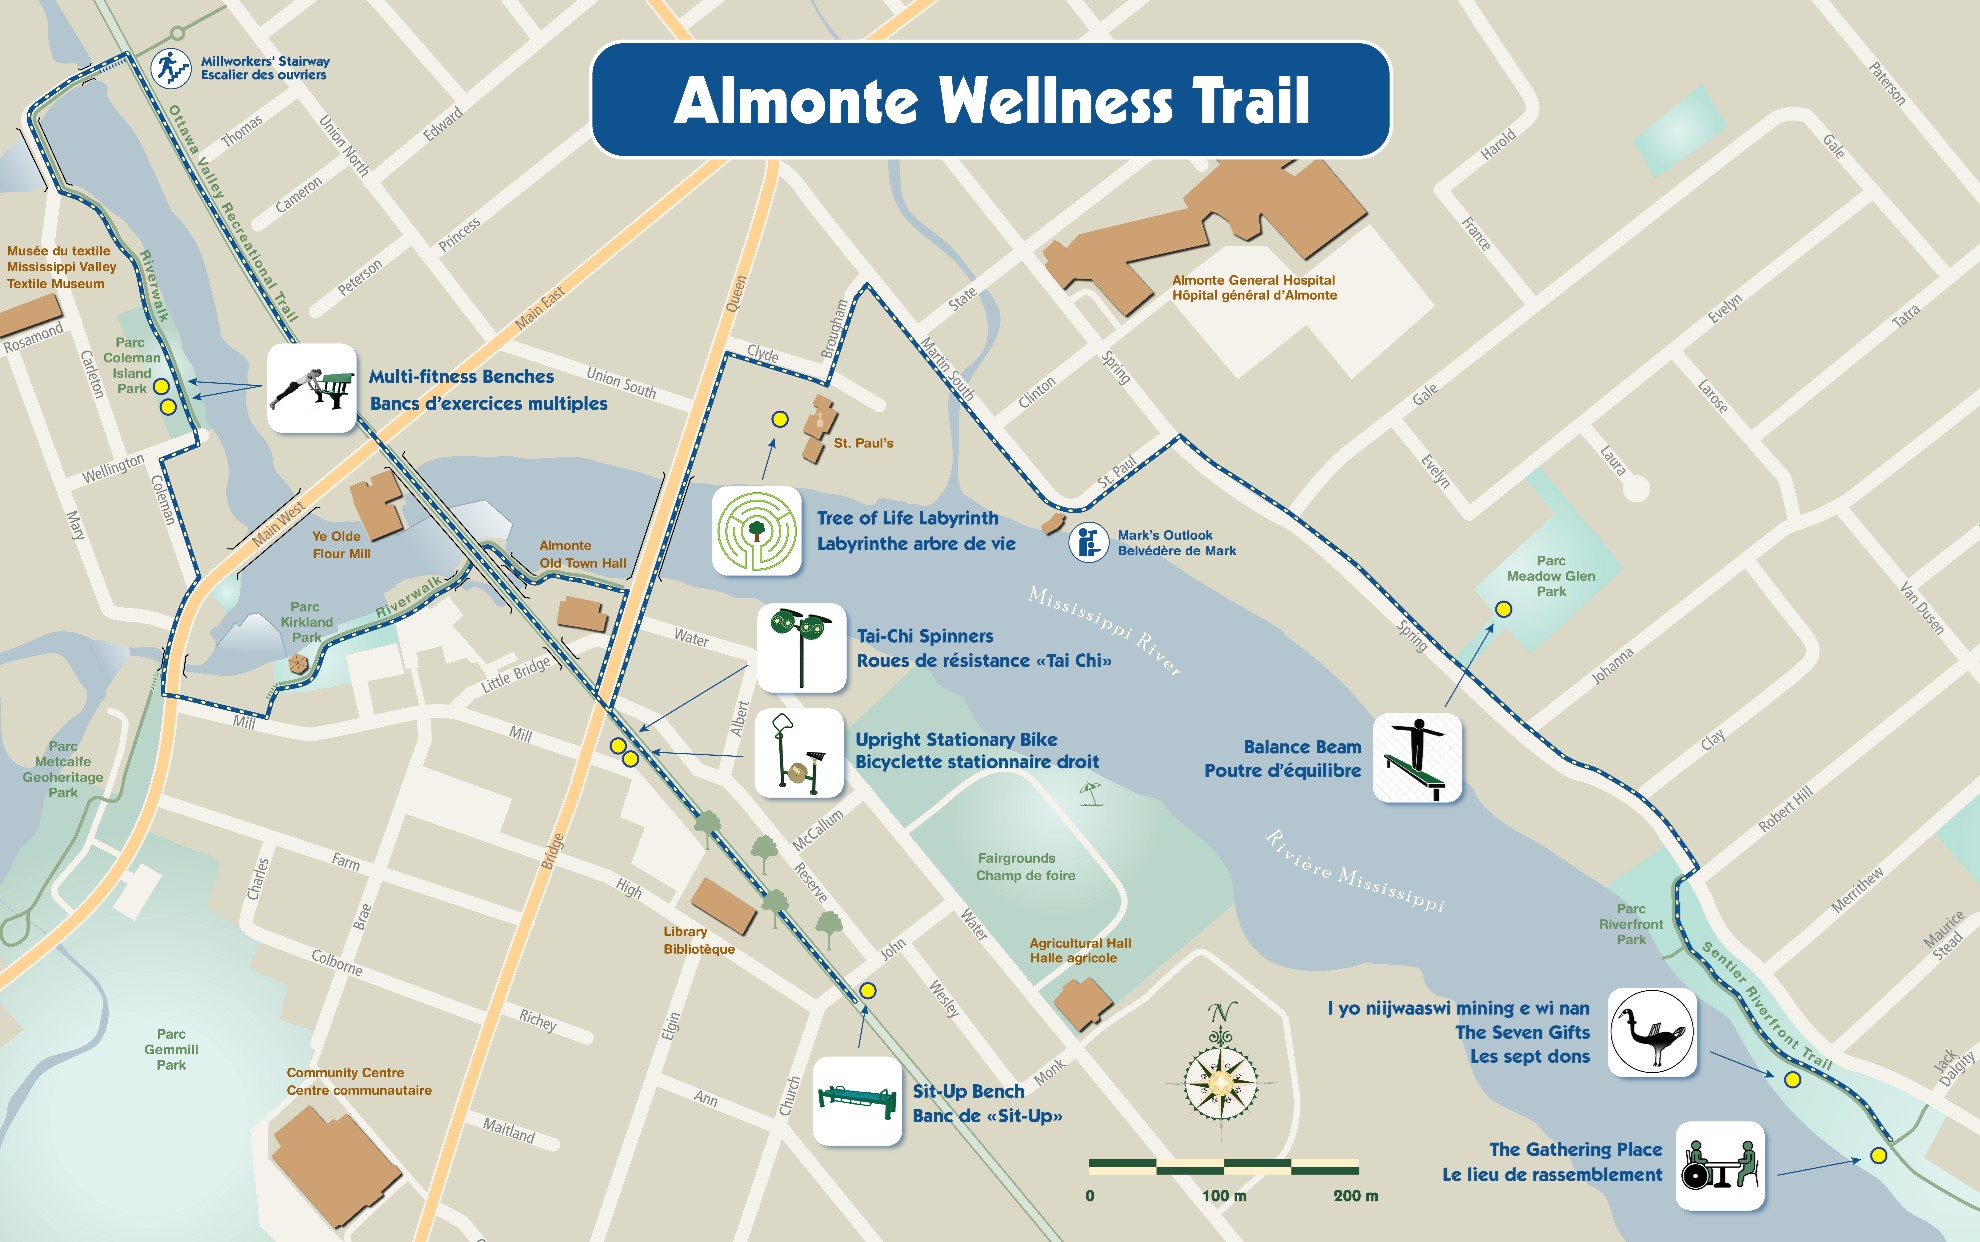 Map showing the Almonte Wellness Trail